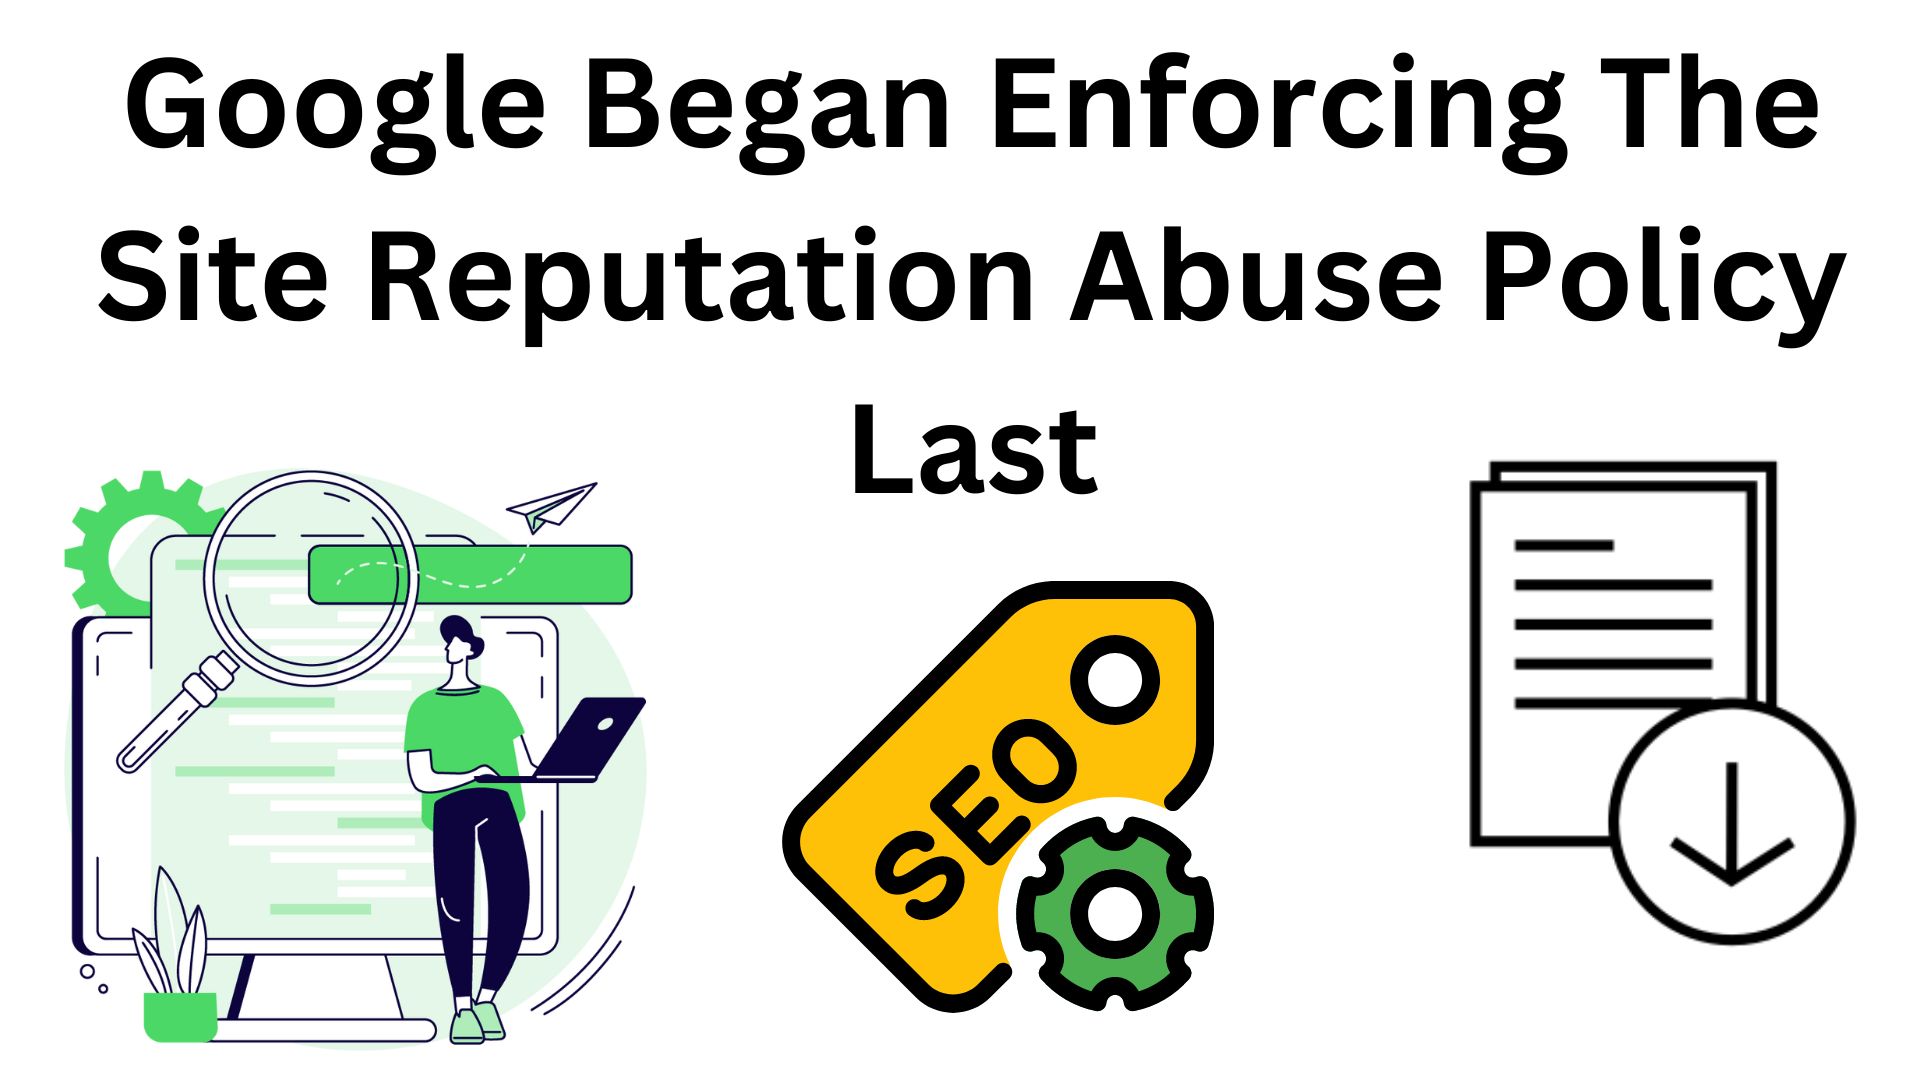 Google Began Enforcing The Site Reputation Abuse Policy Last